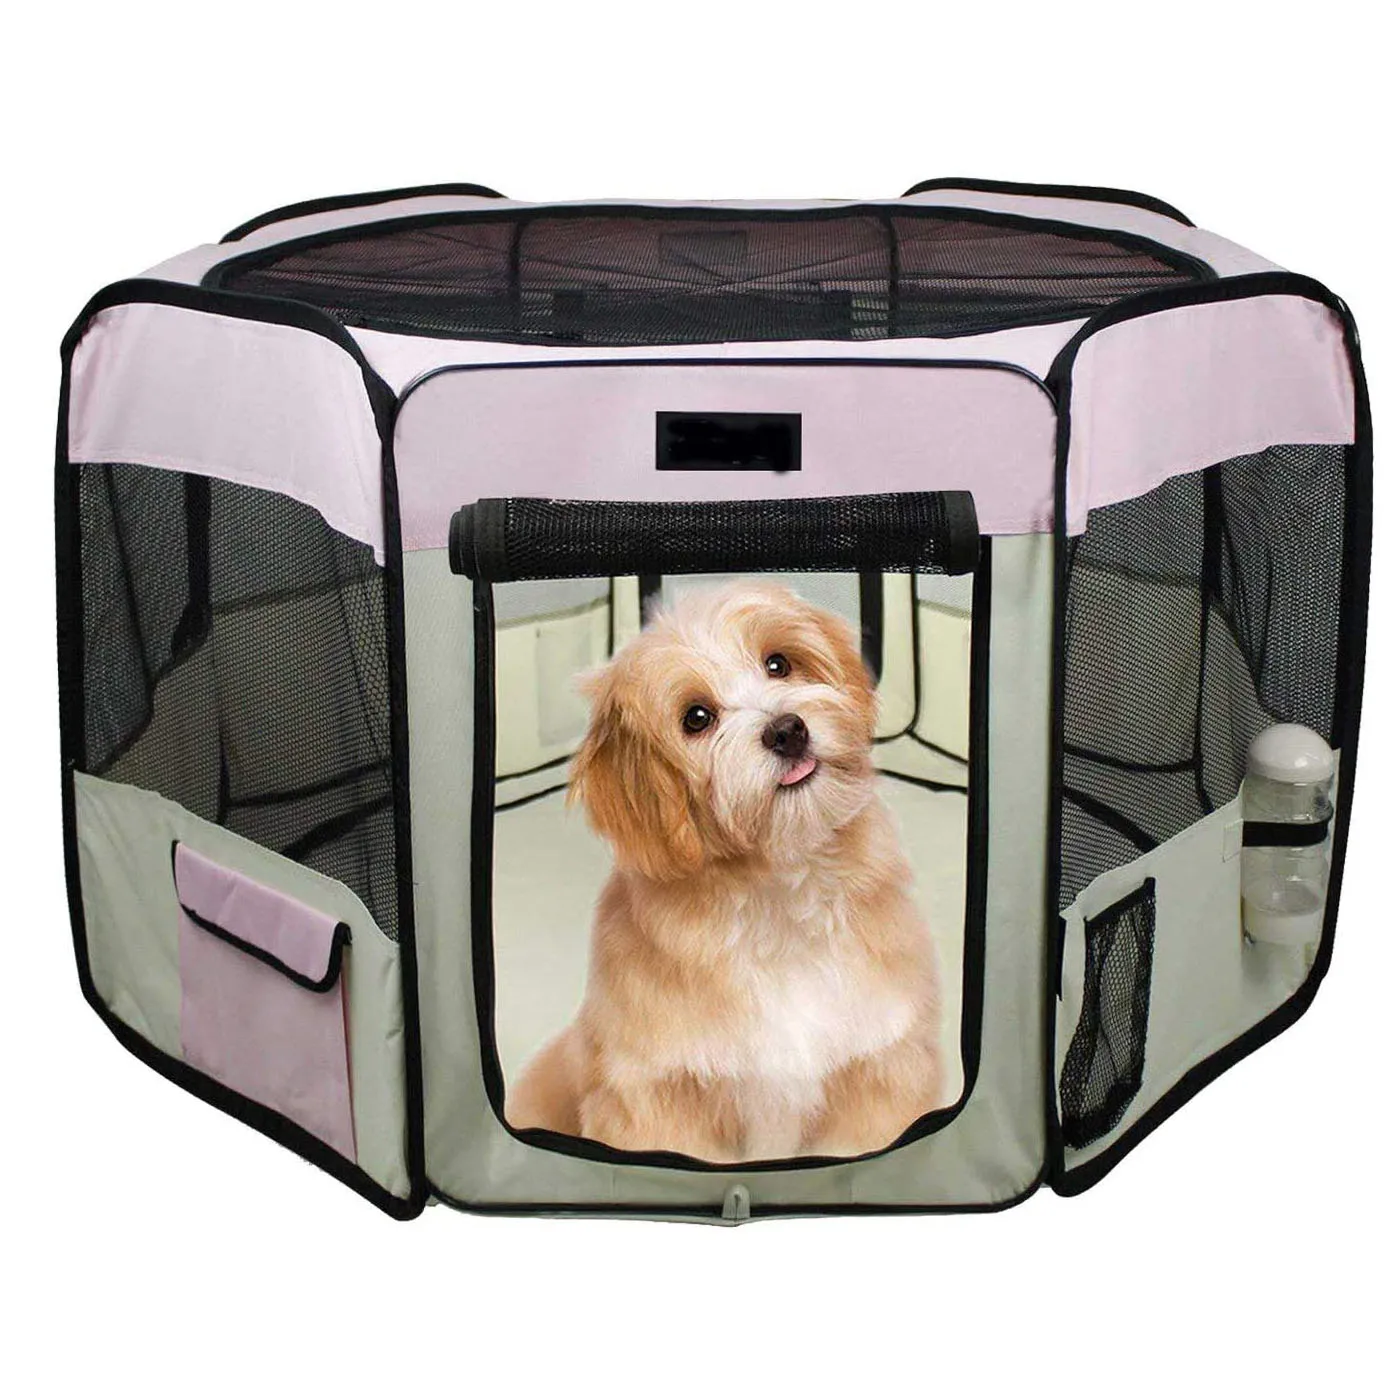 

Dog crate Pet Playpens Portable Soft Dog Exercise Pen Kennel with Carry Bag for Puppy Cats Kittens Rabbits Indoor Outdoor Use